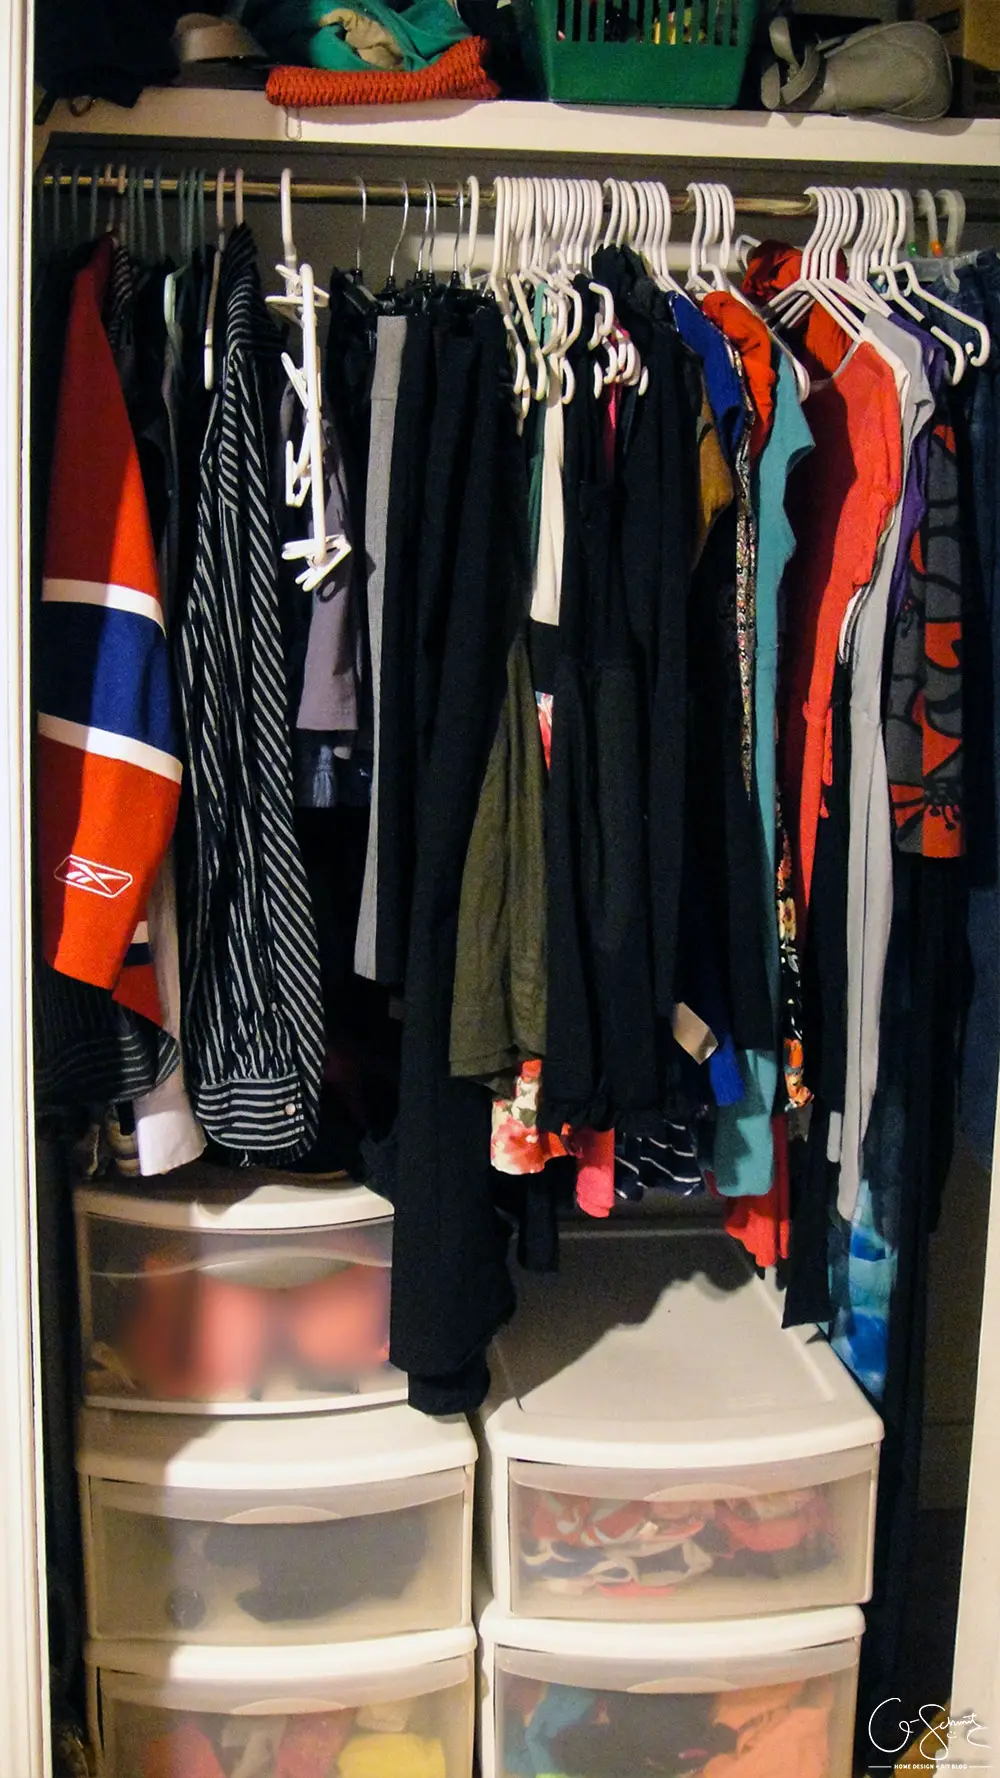 Organizing a master closet is a project that took us less than an afternoon to complete, and really changed the space. But this is just Part 1…